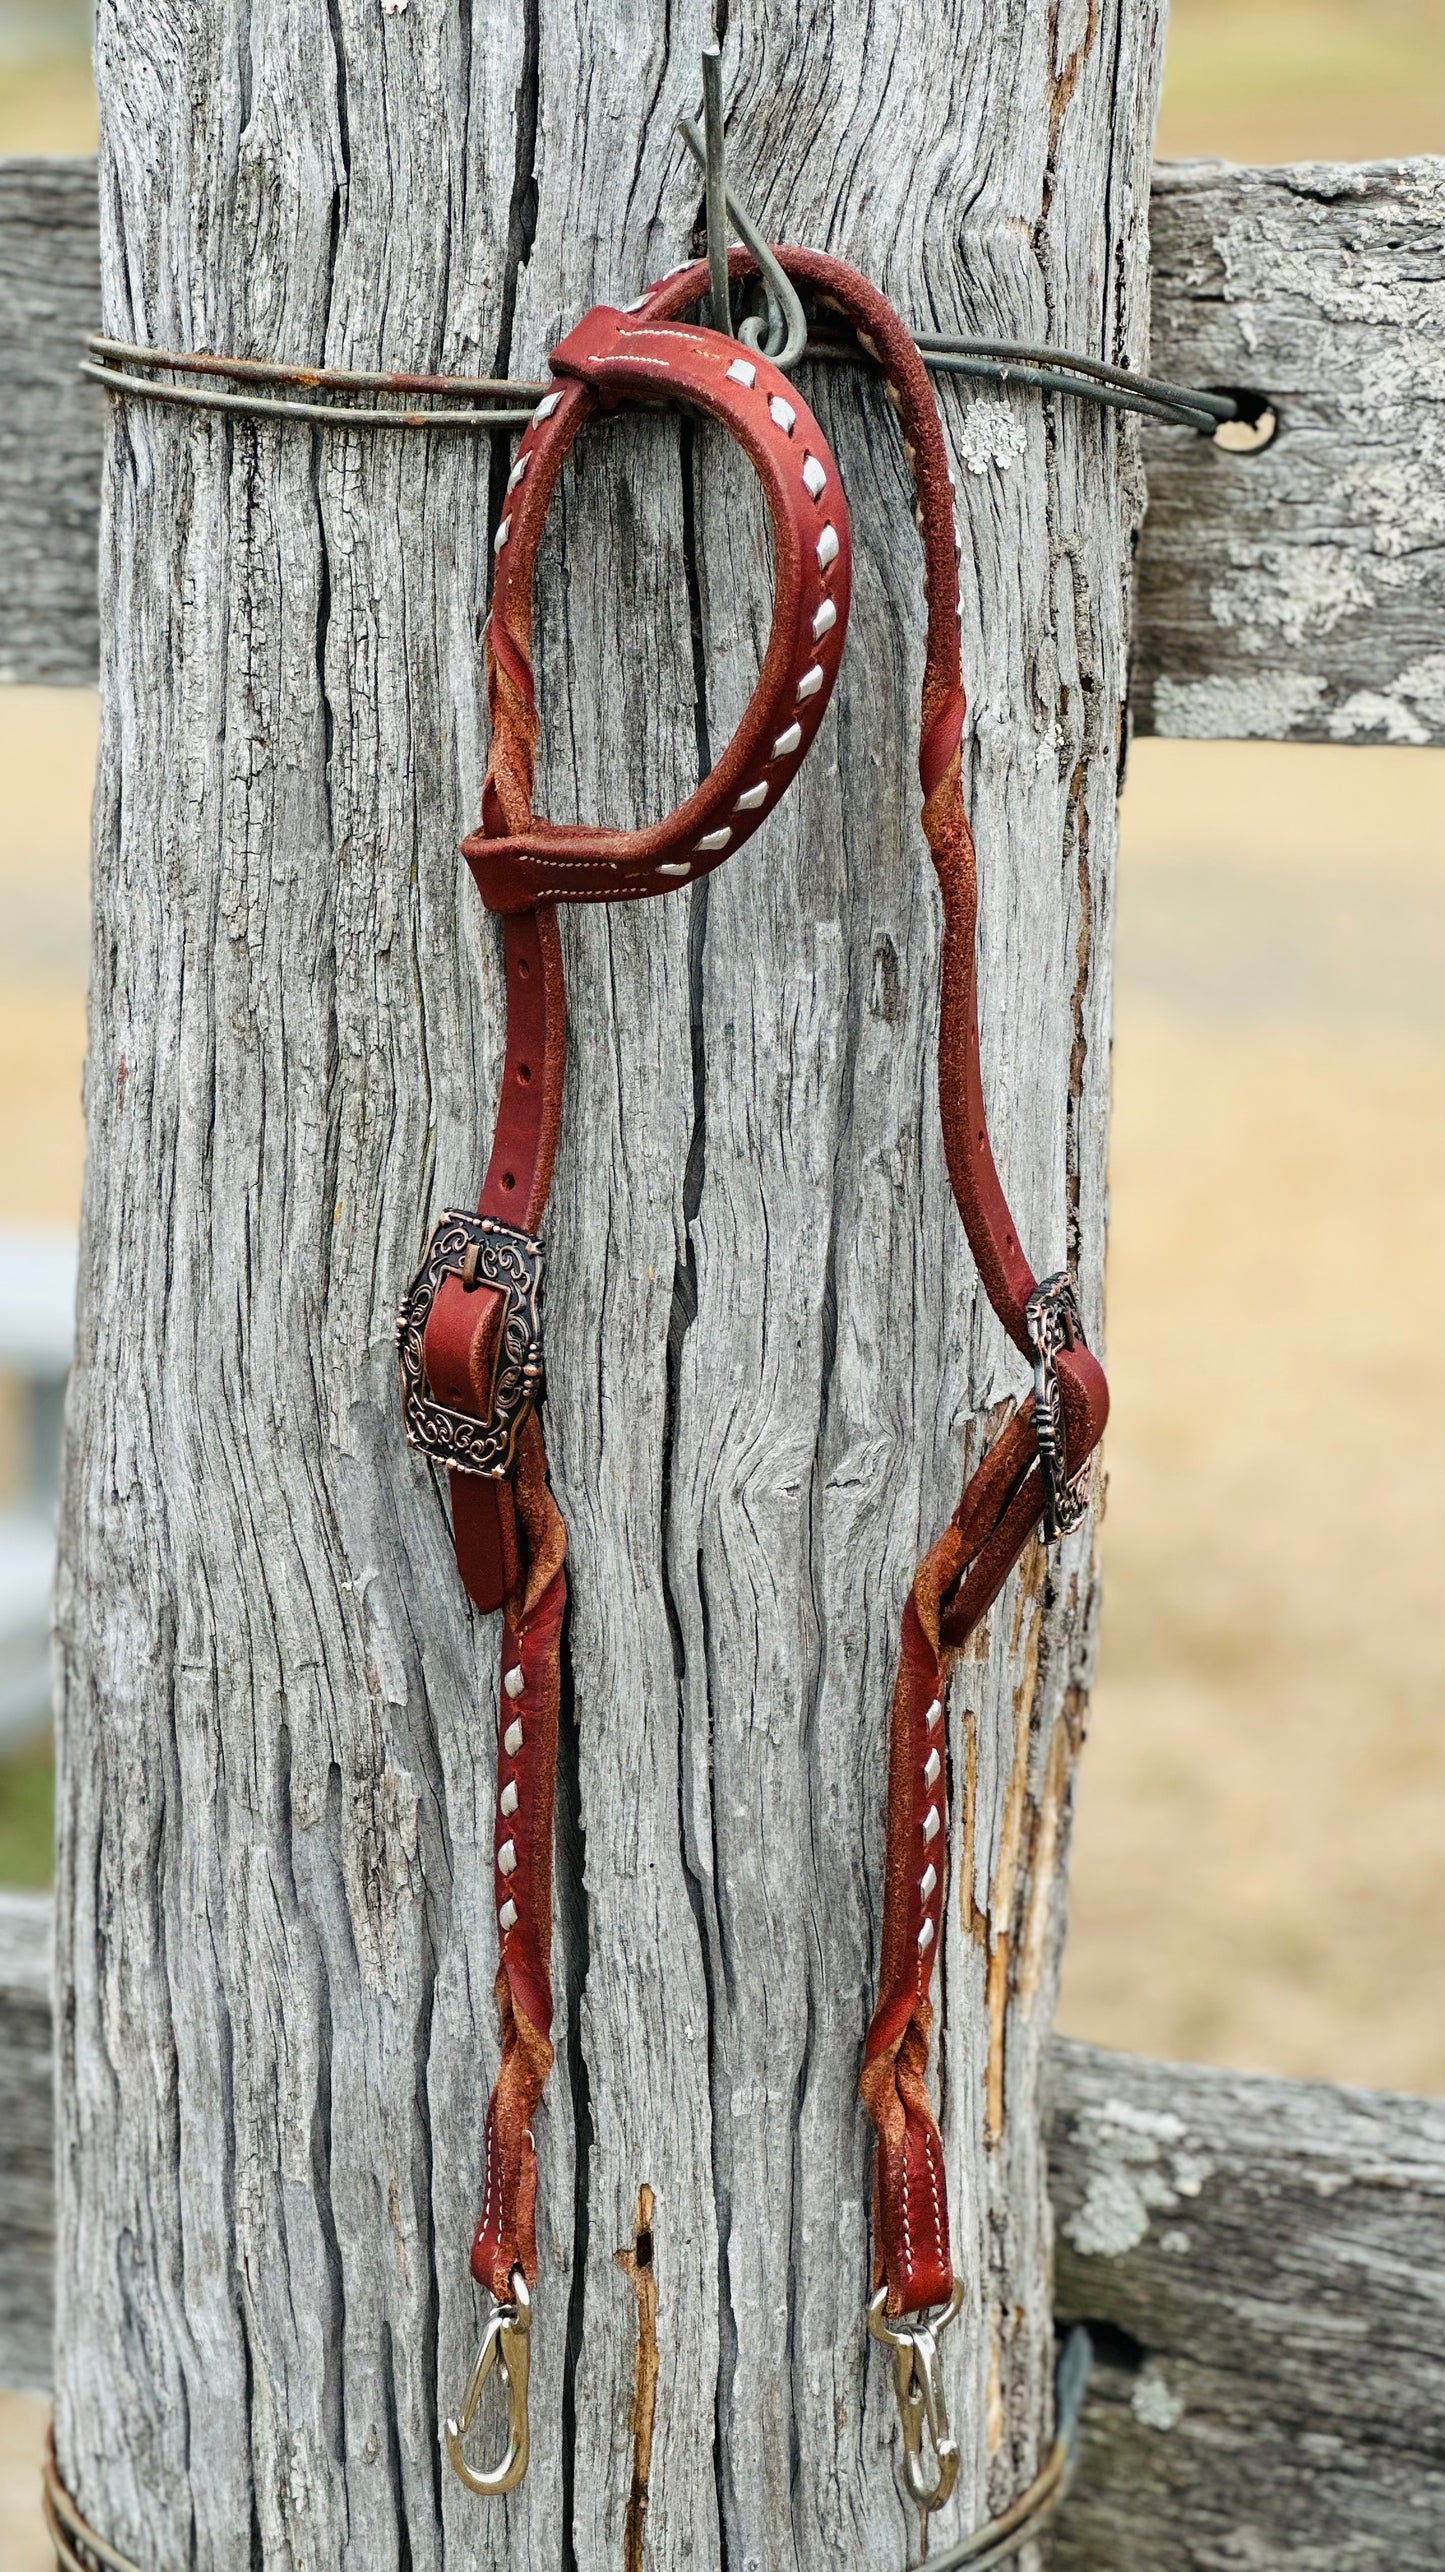 Harness Leather Buckstitch And Bloodknot One Eared Bridle - Metallic Silver